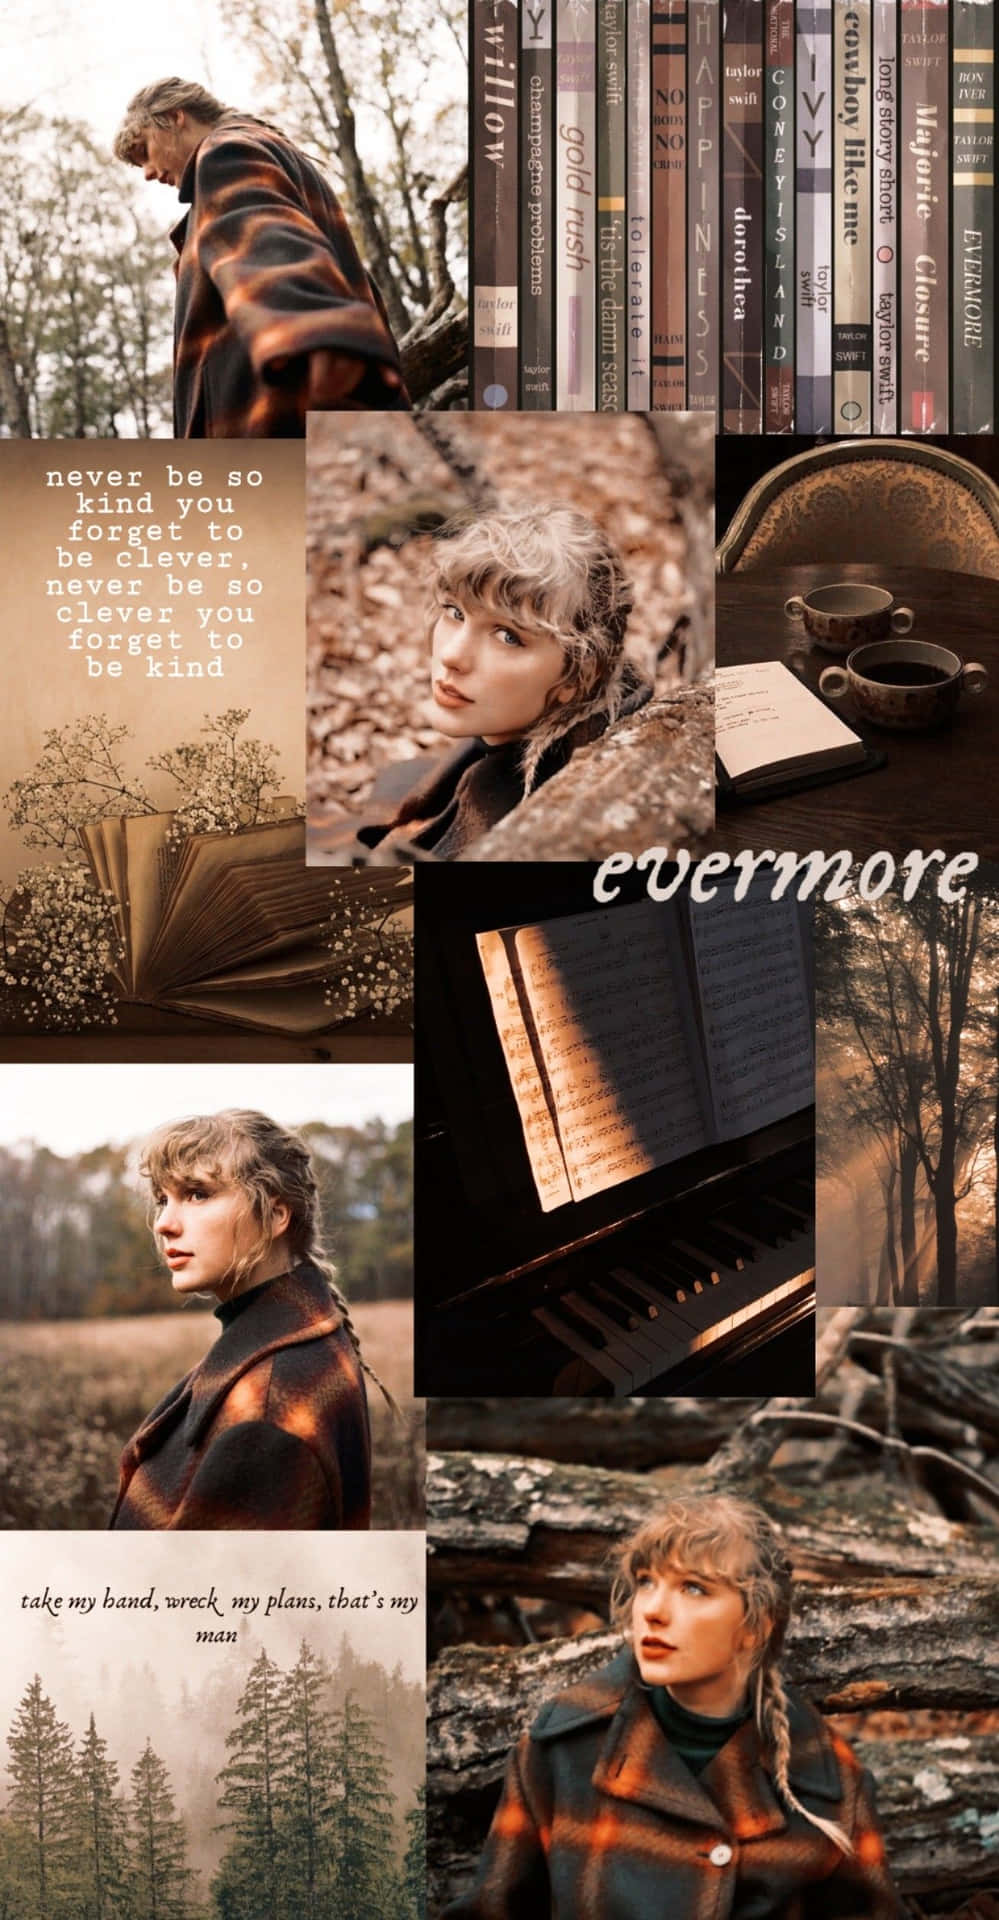 Evermore Aesthetic Collage Wallpaper